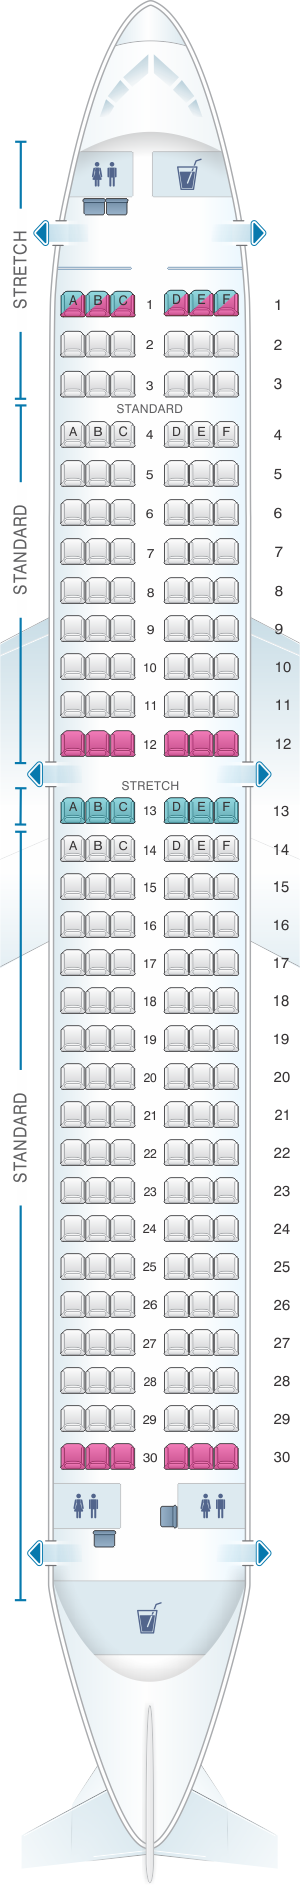 Seat map for Frontier Airlines Airbus A320neo